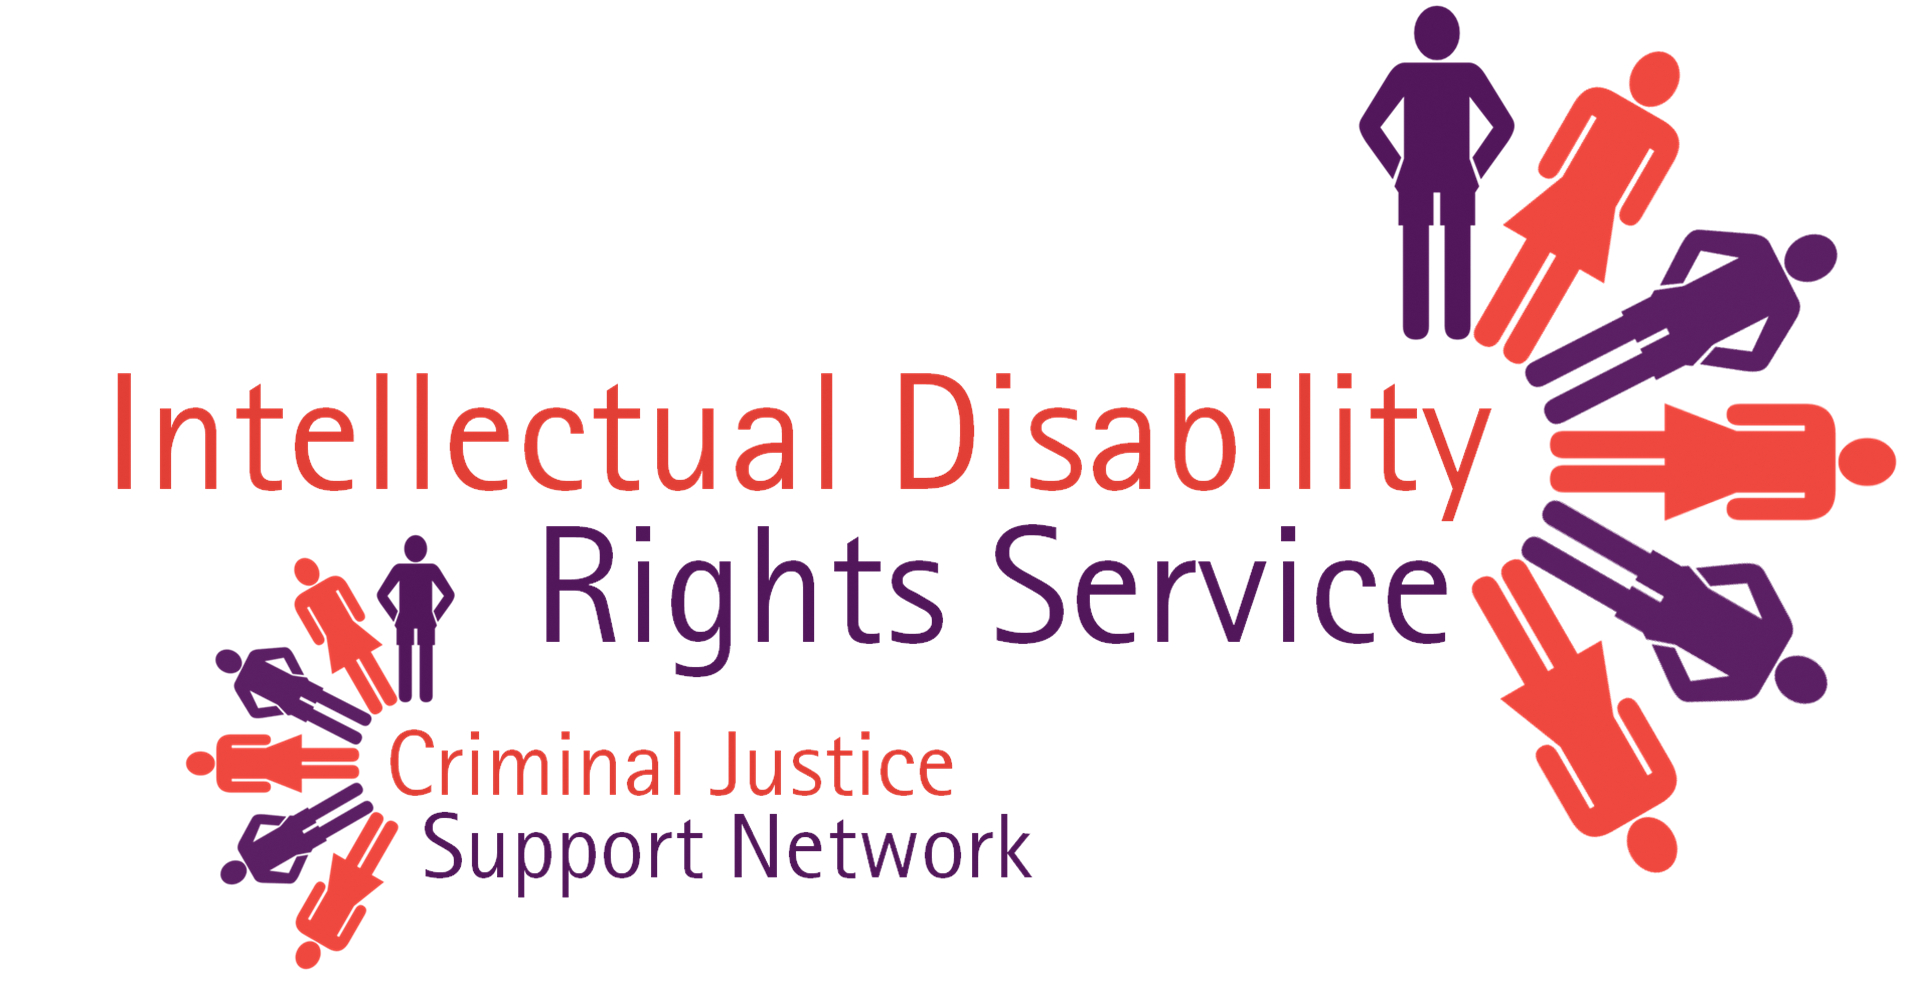 Intellectual Disability Rights Service (IDRS)